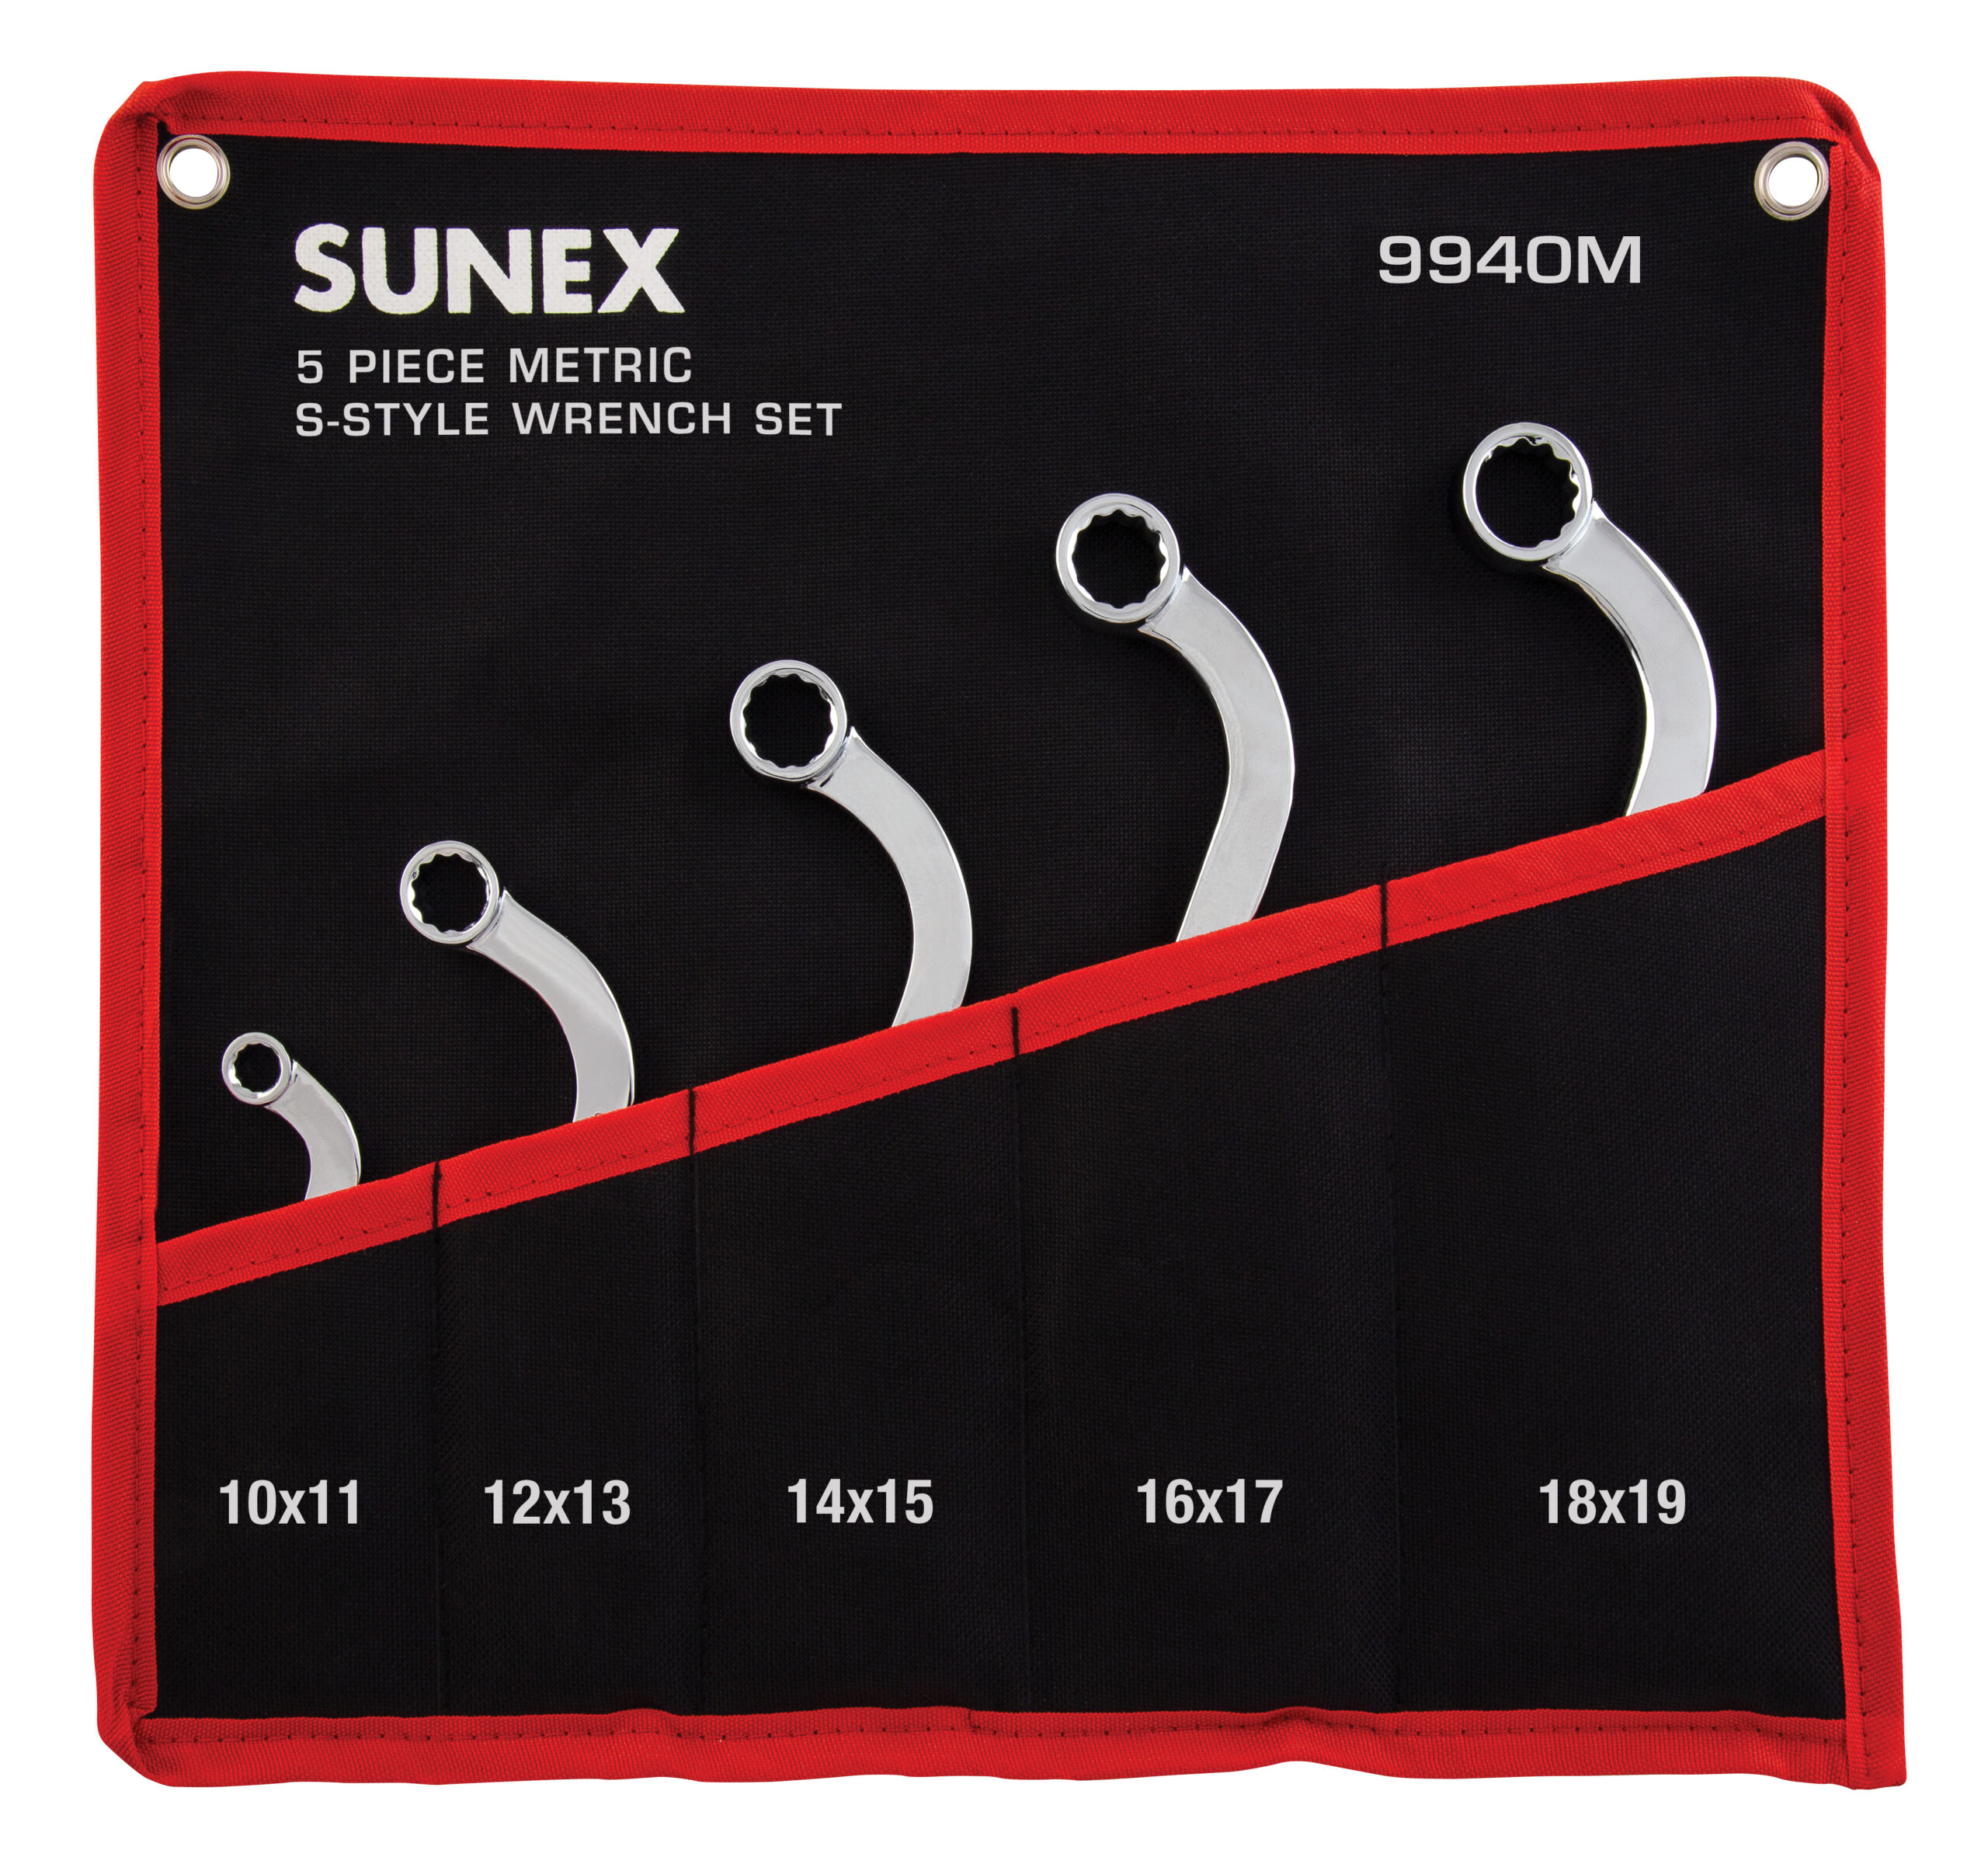 5 PIECE METRIC S-STYLE WRENCH SET